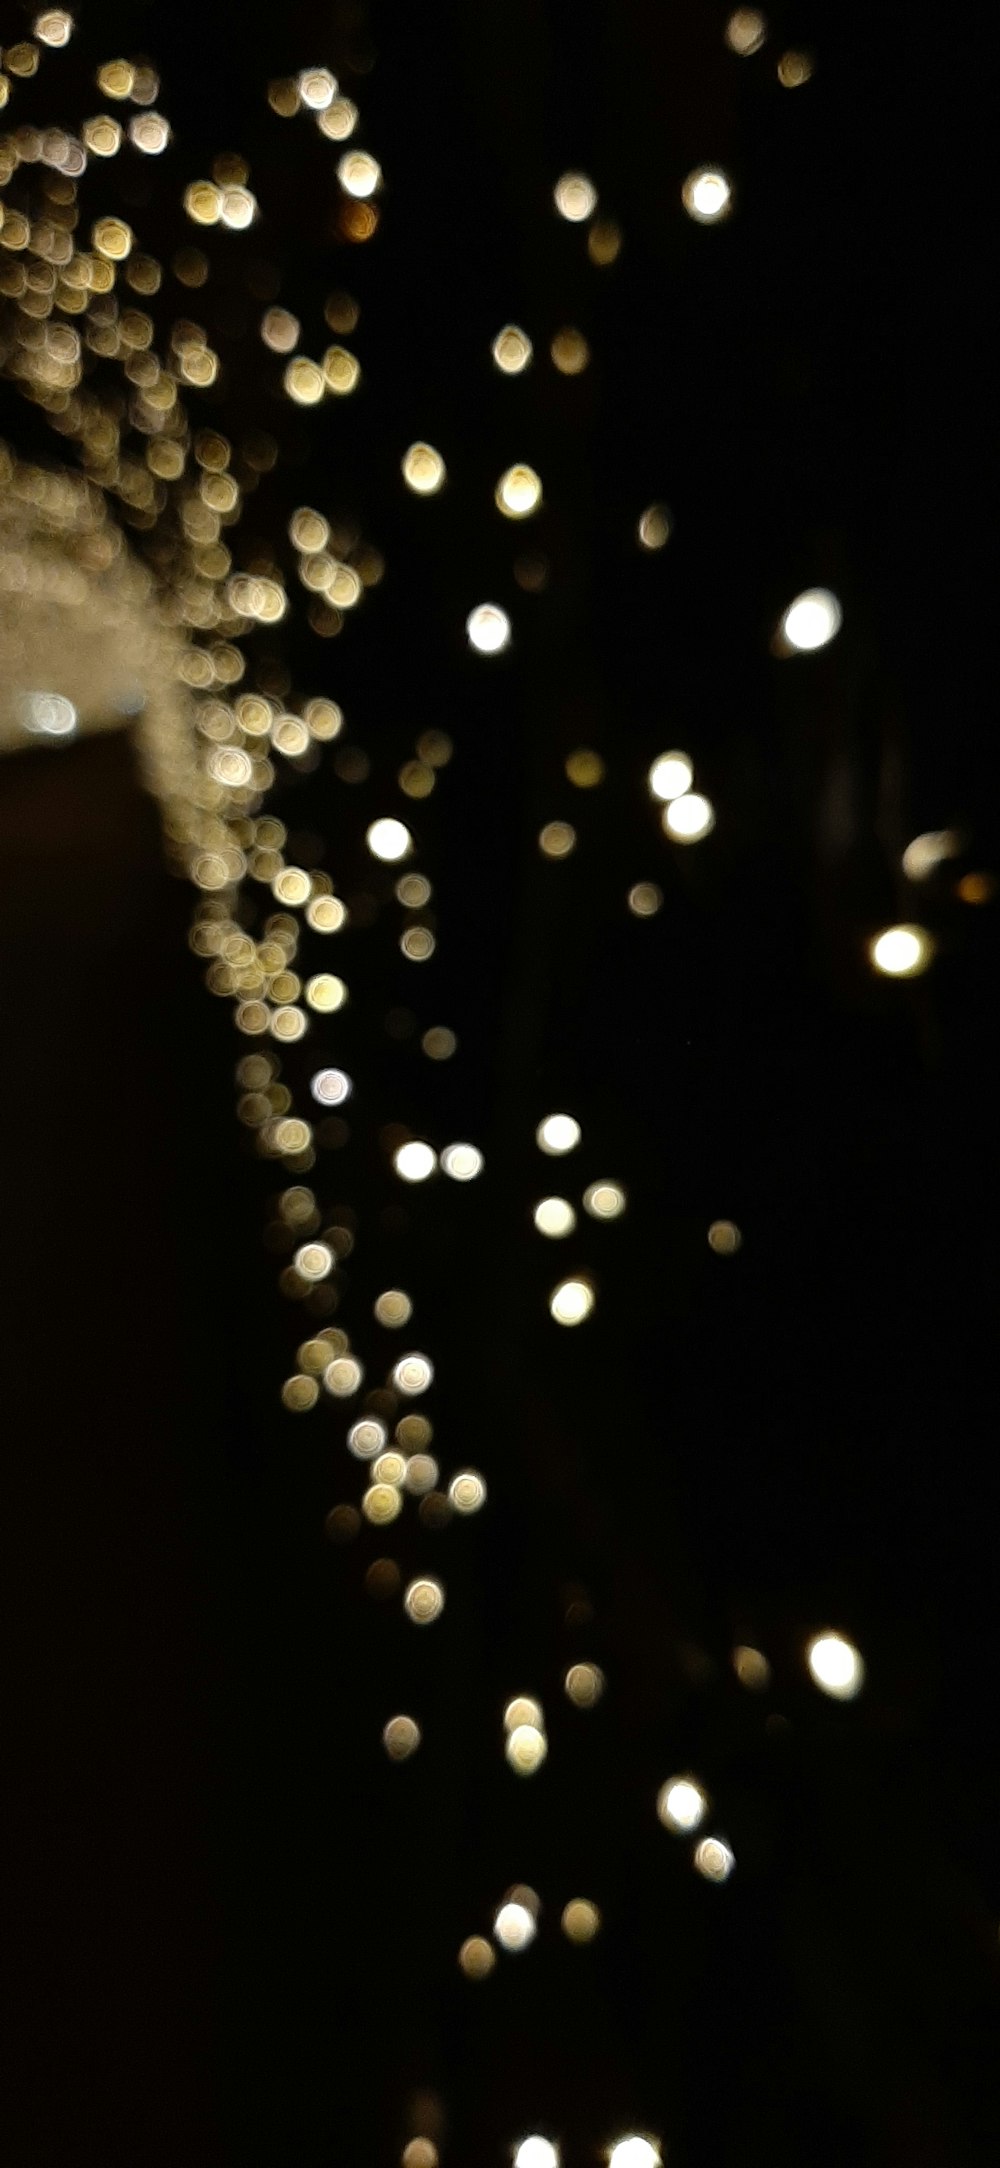 a blurry photo of lights in the dark